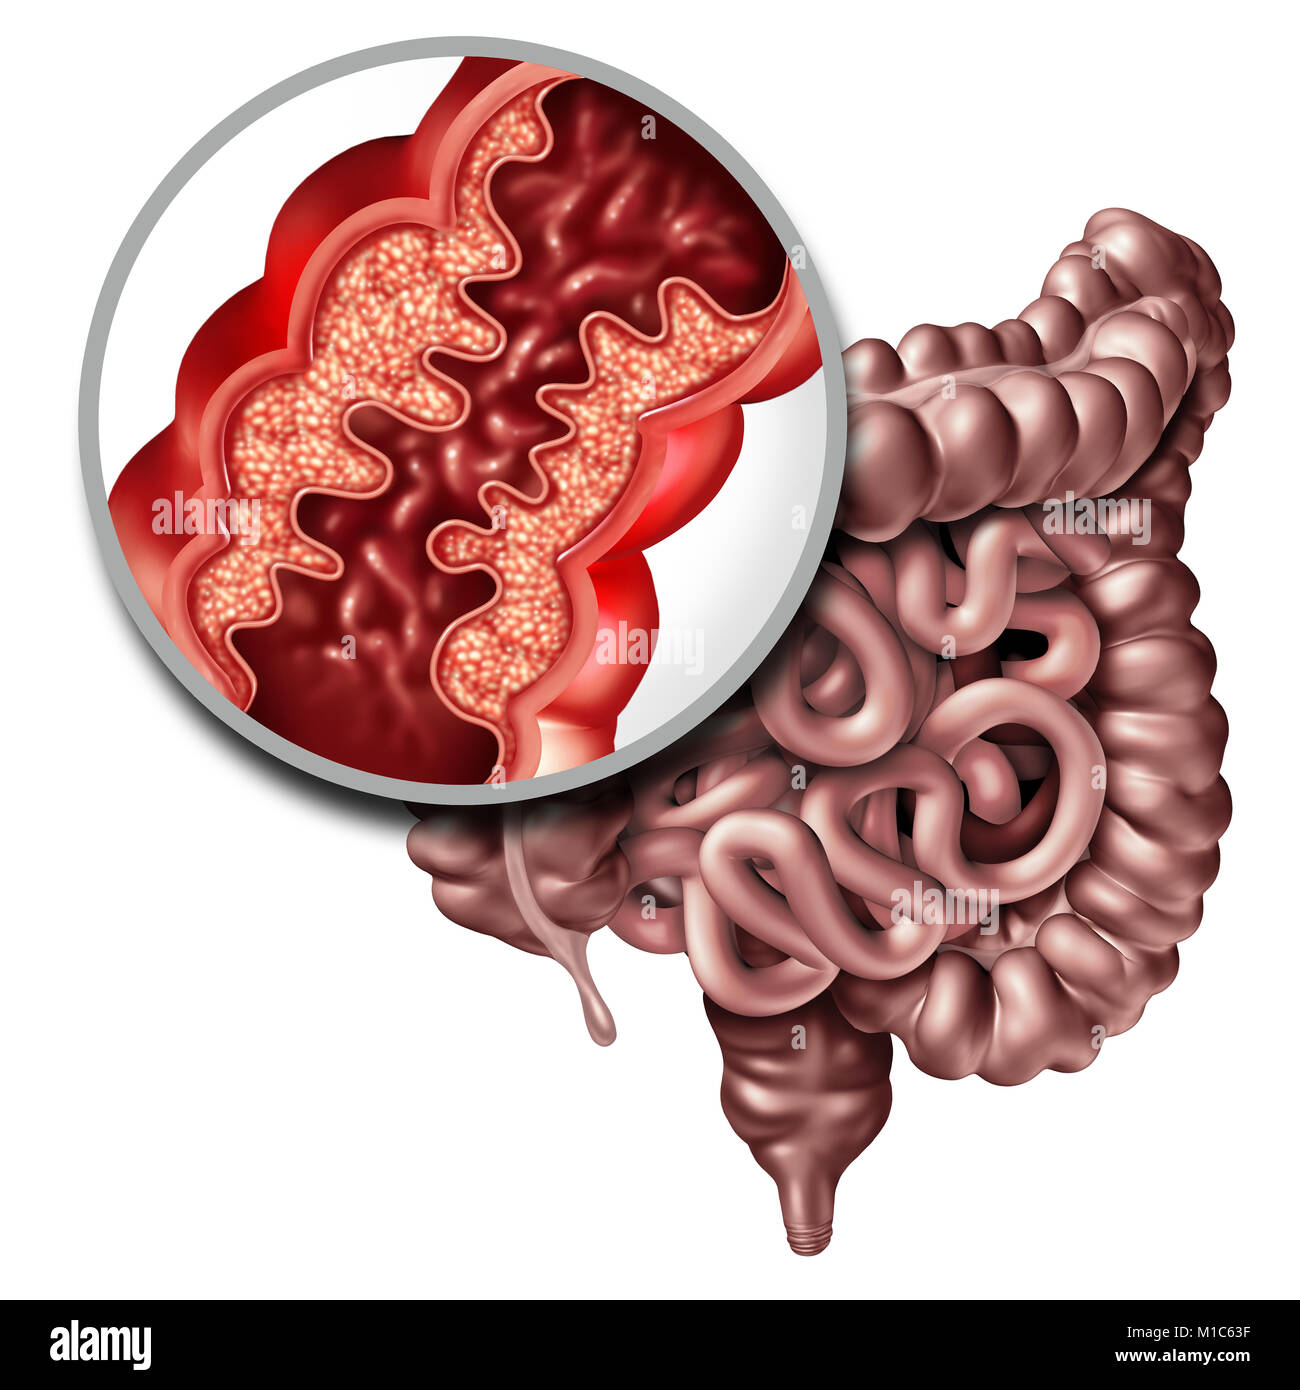 Crohnâ€™s disease or crohn illness medical concept as a close up of a human intestine with inflammation symptoms causing obstruction. Stock Photo